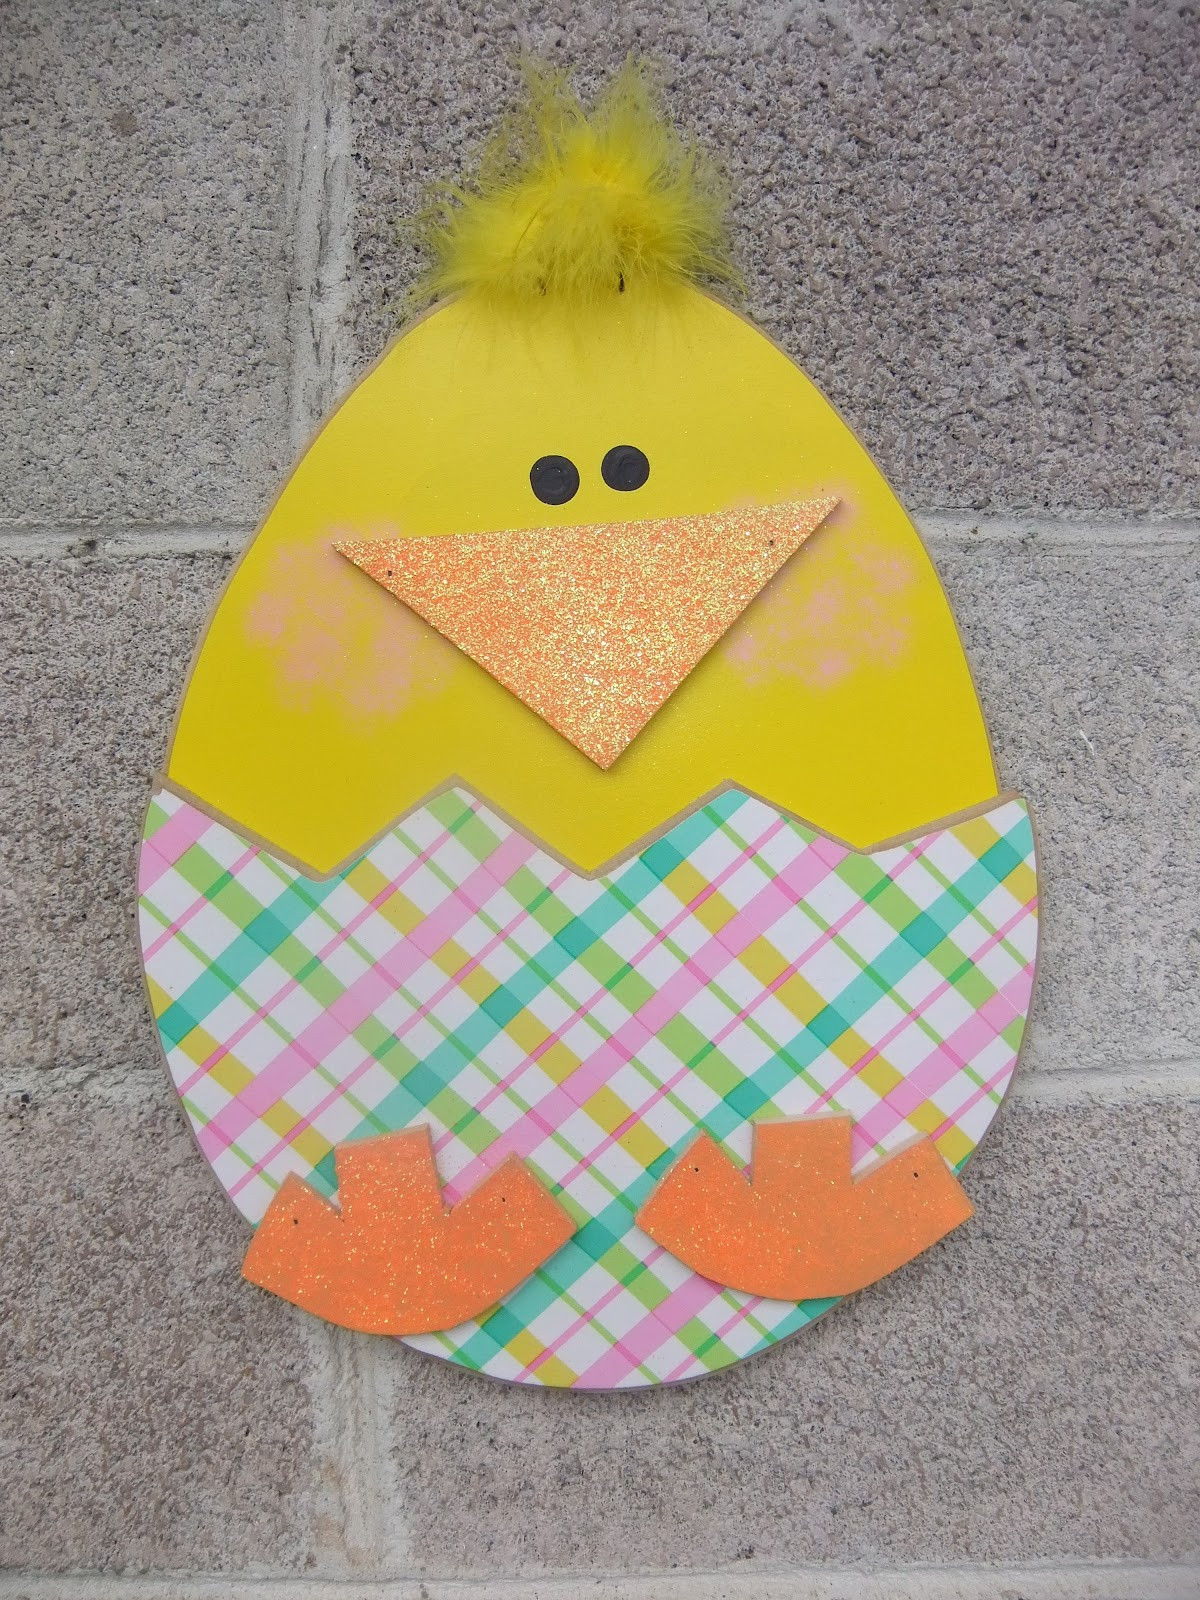 Pinterest Easter Crafts
 75 Best Easter Craft Ideas – The WoW Style